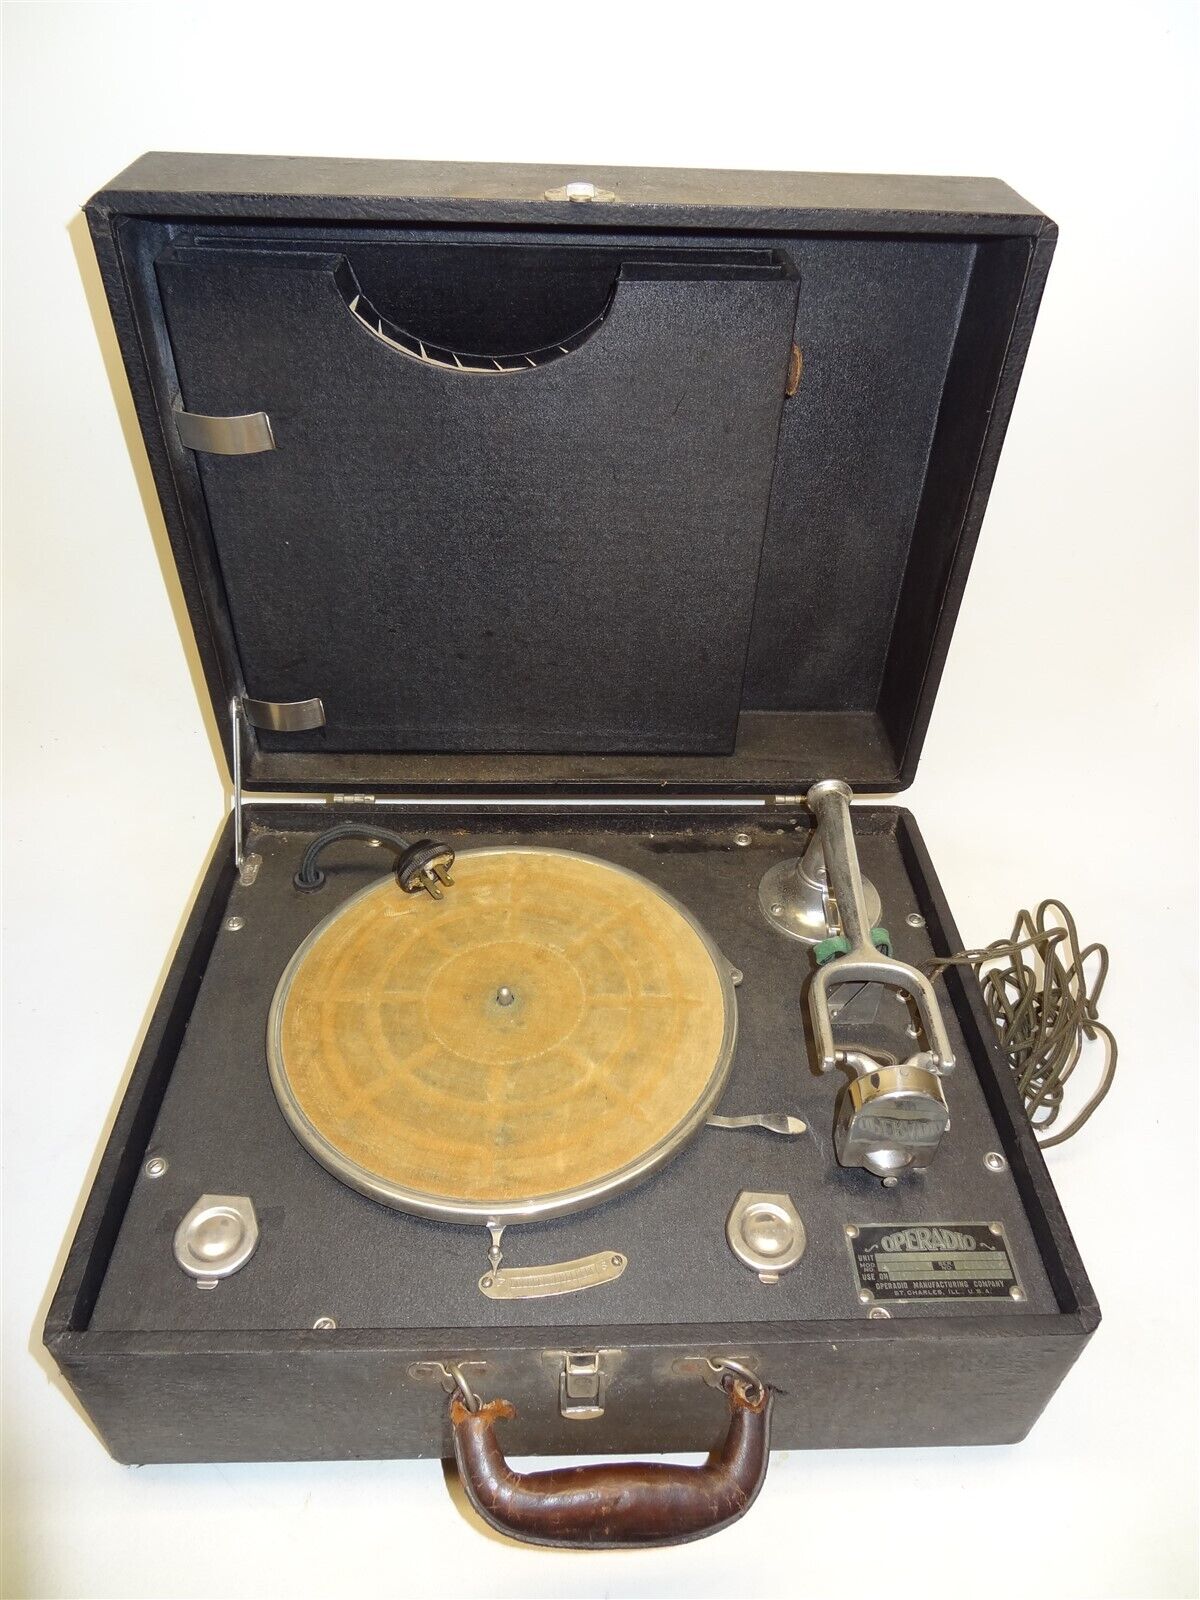 1920s Operadio Portable Electric Turntable A 1145 * St. Charles Illinois *AS IS 